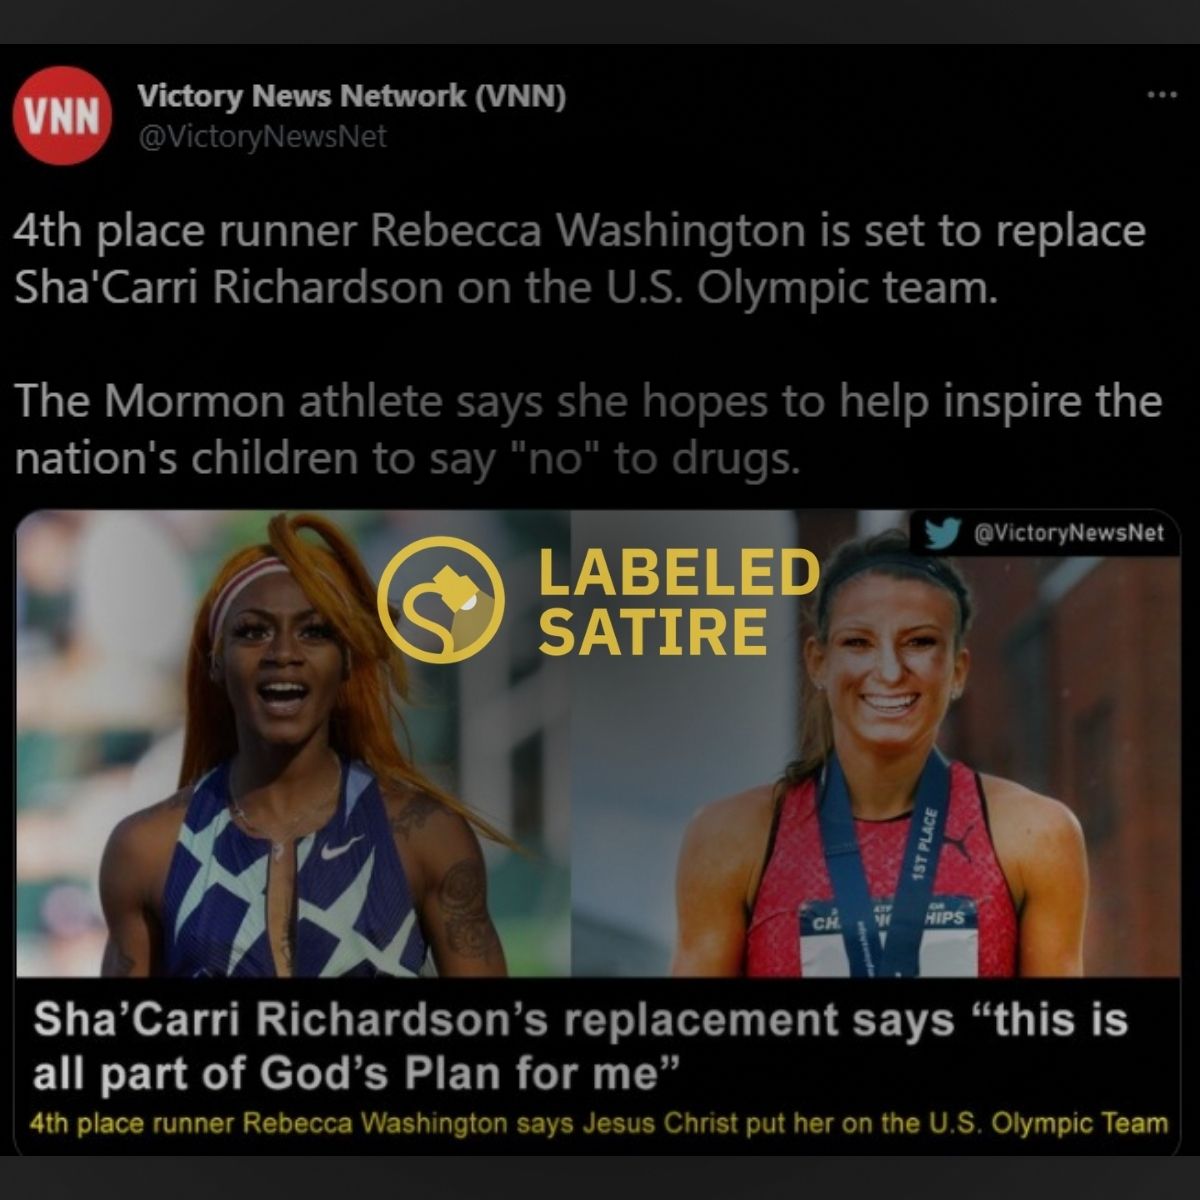 Olympic athlete Sha'Carri Richardson was replaced by Rebecca Washington a Mormon athlete with an anti-drug stance after Richardson tested positive for marijuana use.